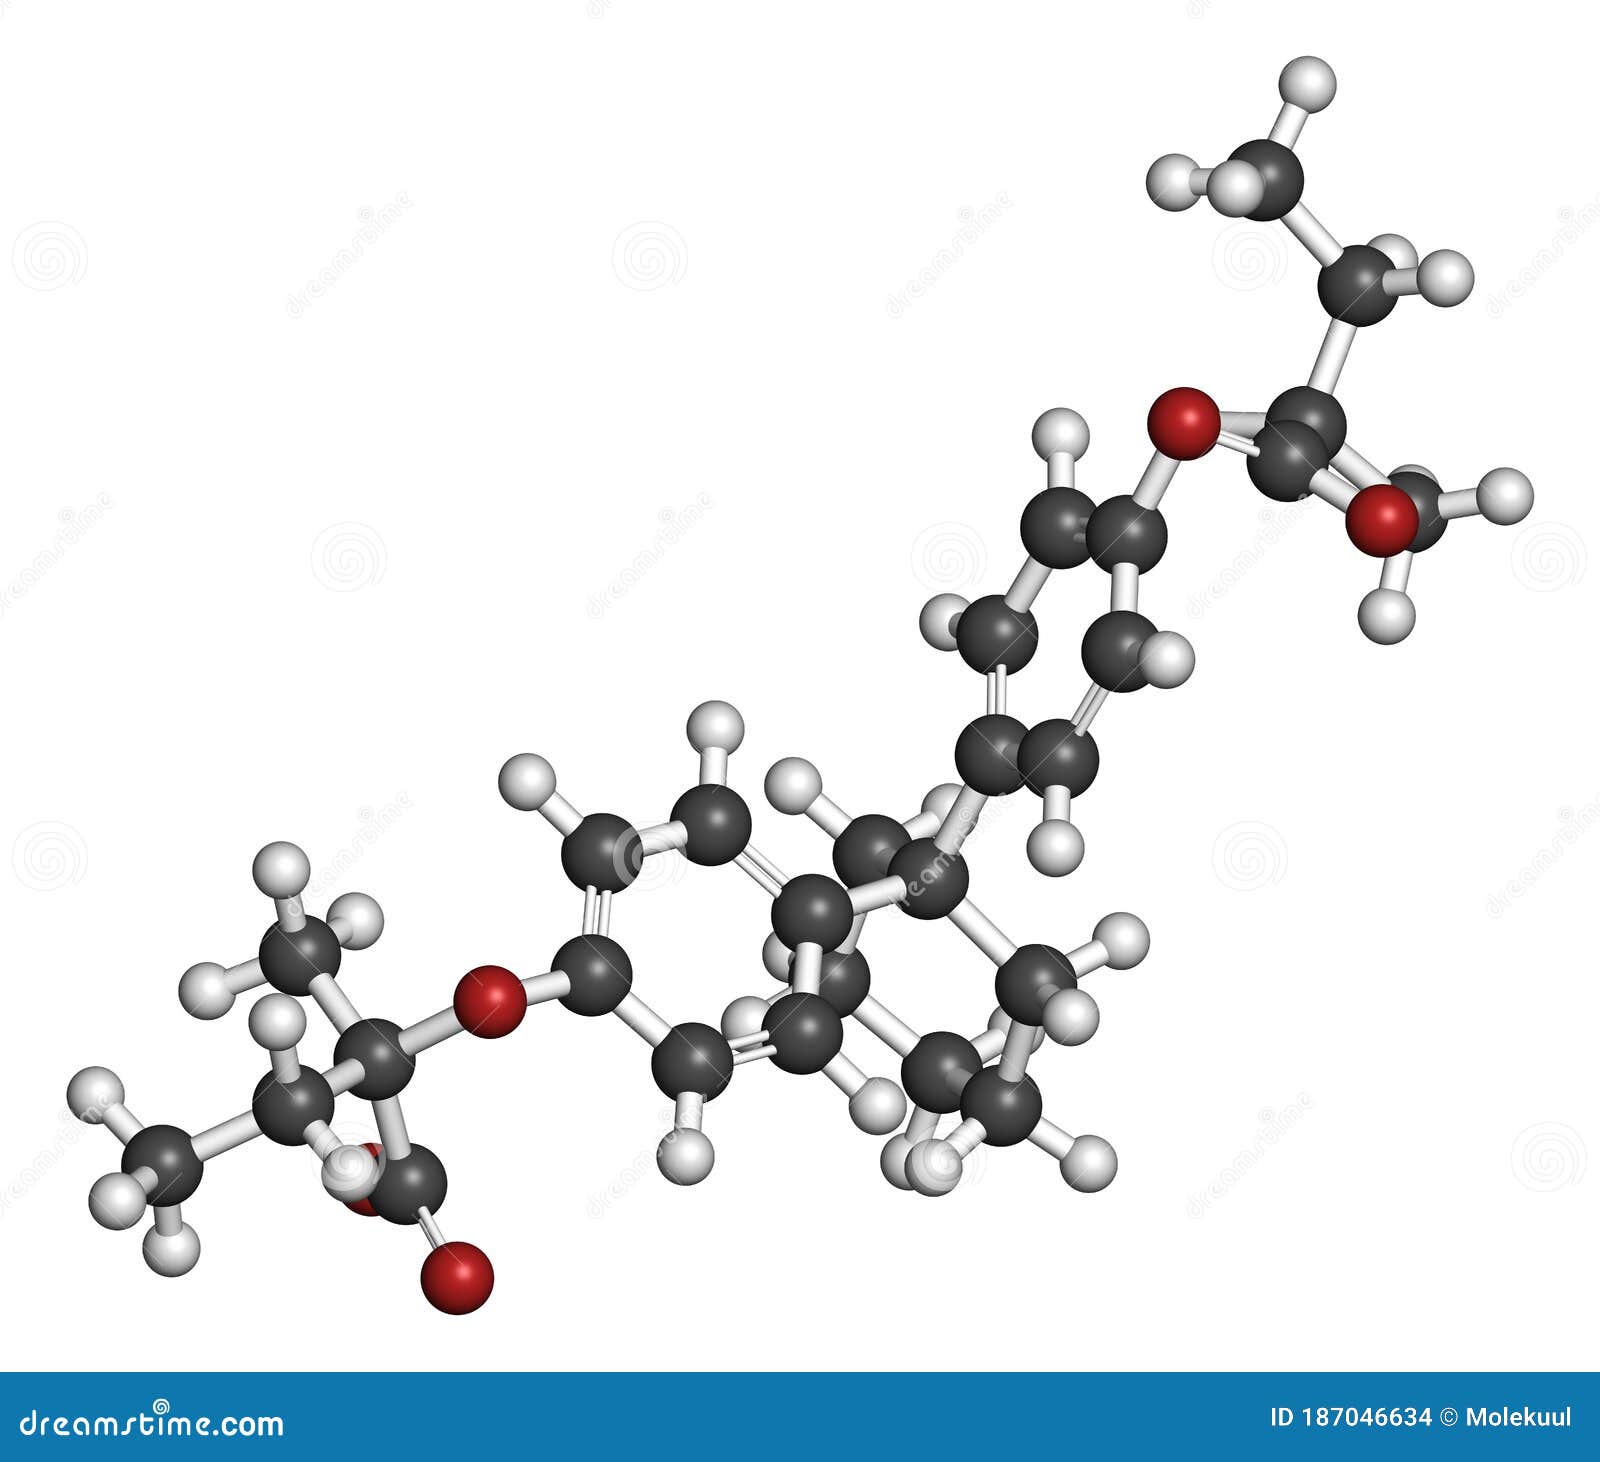 clinofibrate hyperlipidemia drug molecule (fibrate class). 3d rendering. atoms are represented as spheres with conventional color